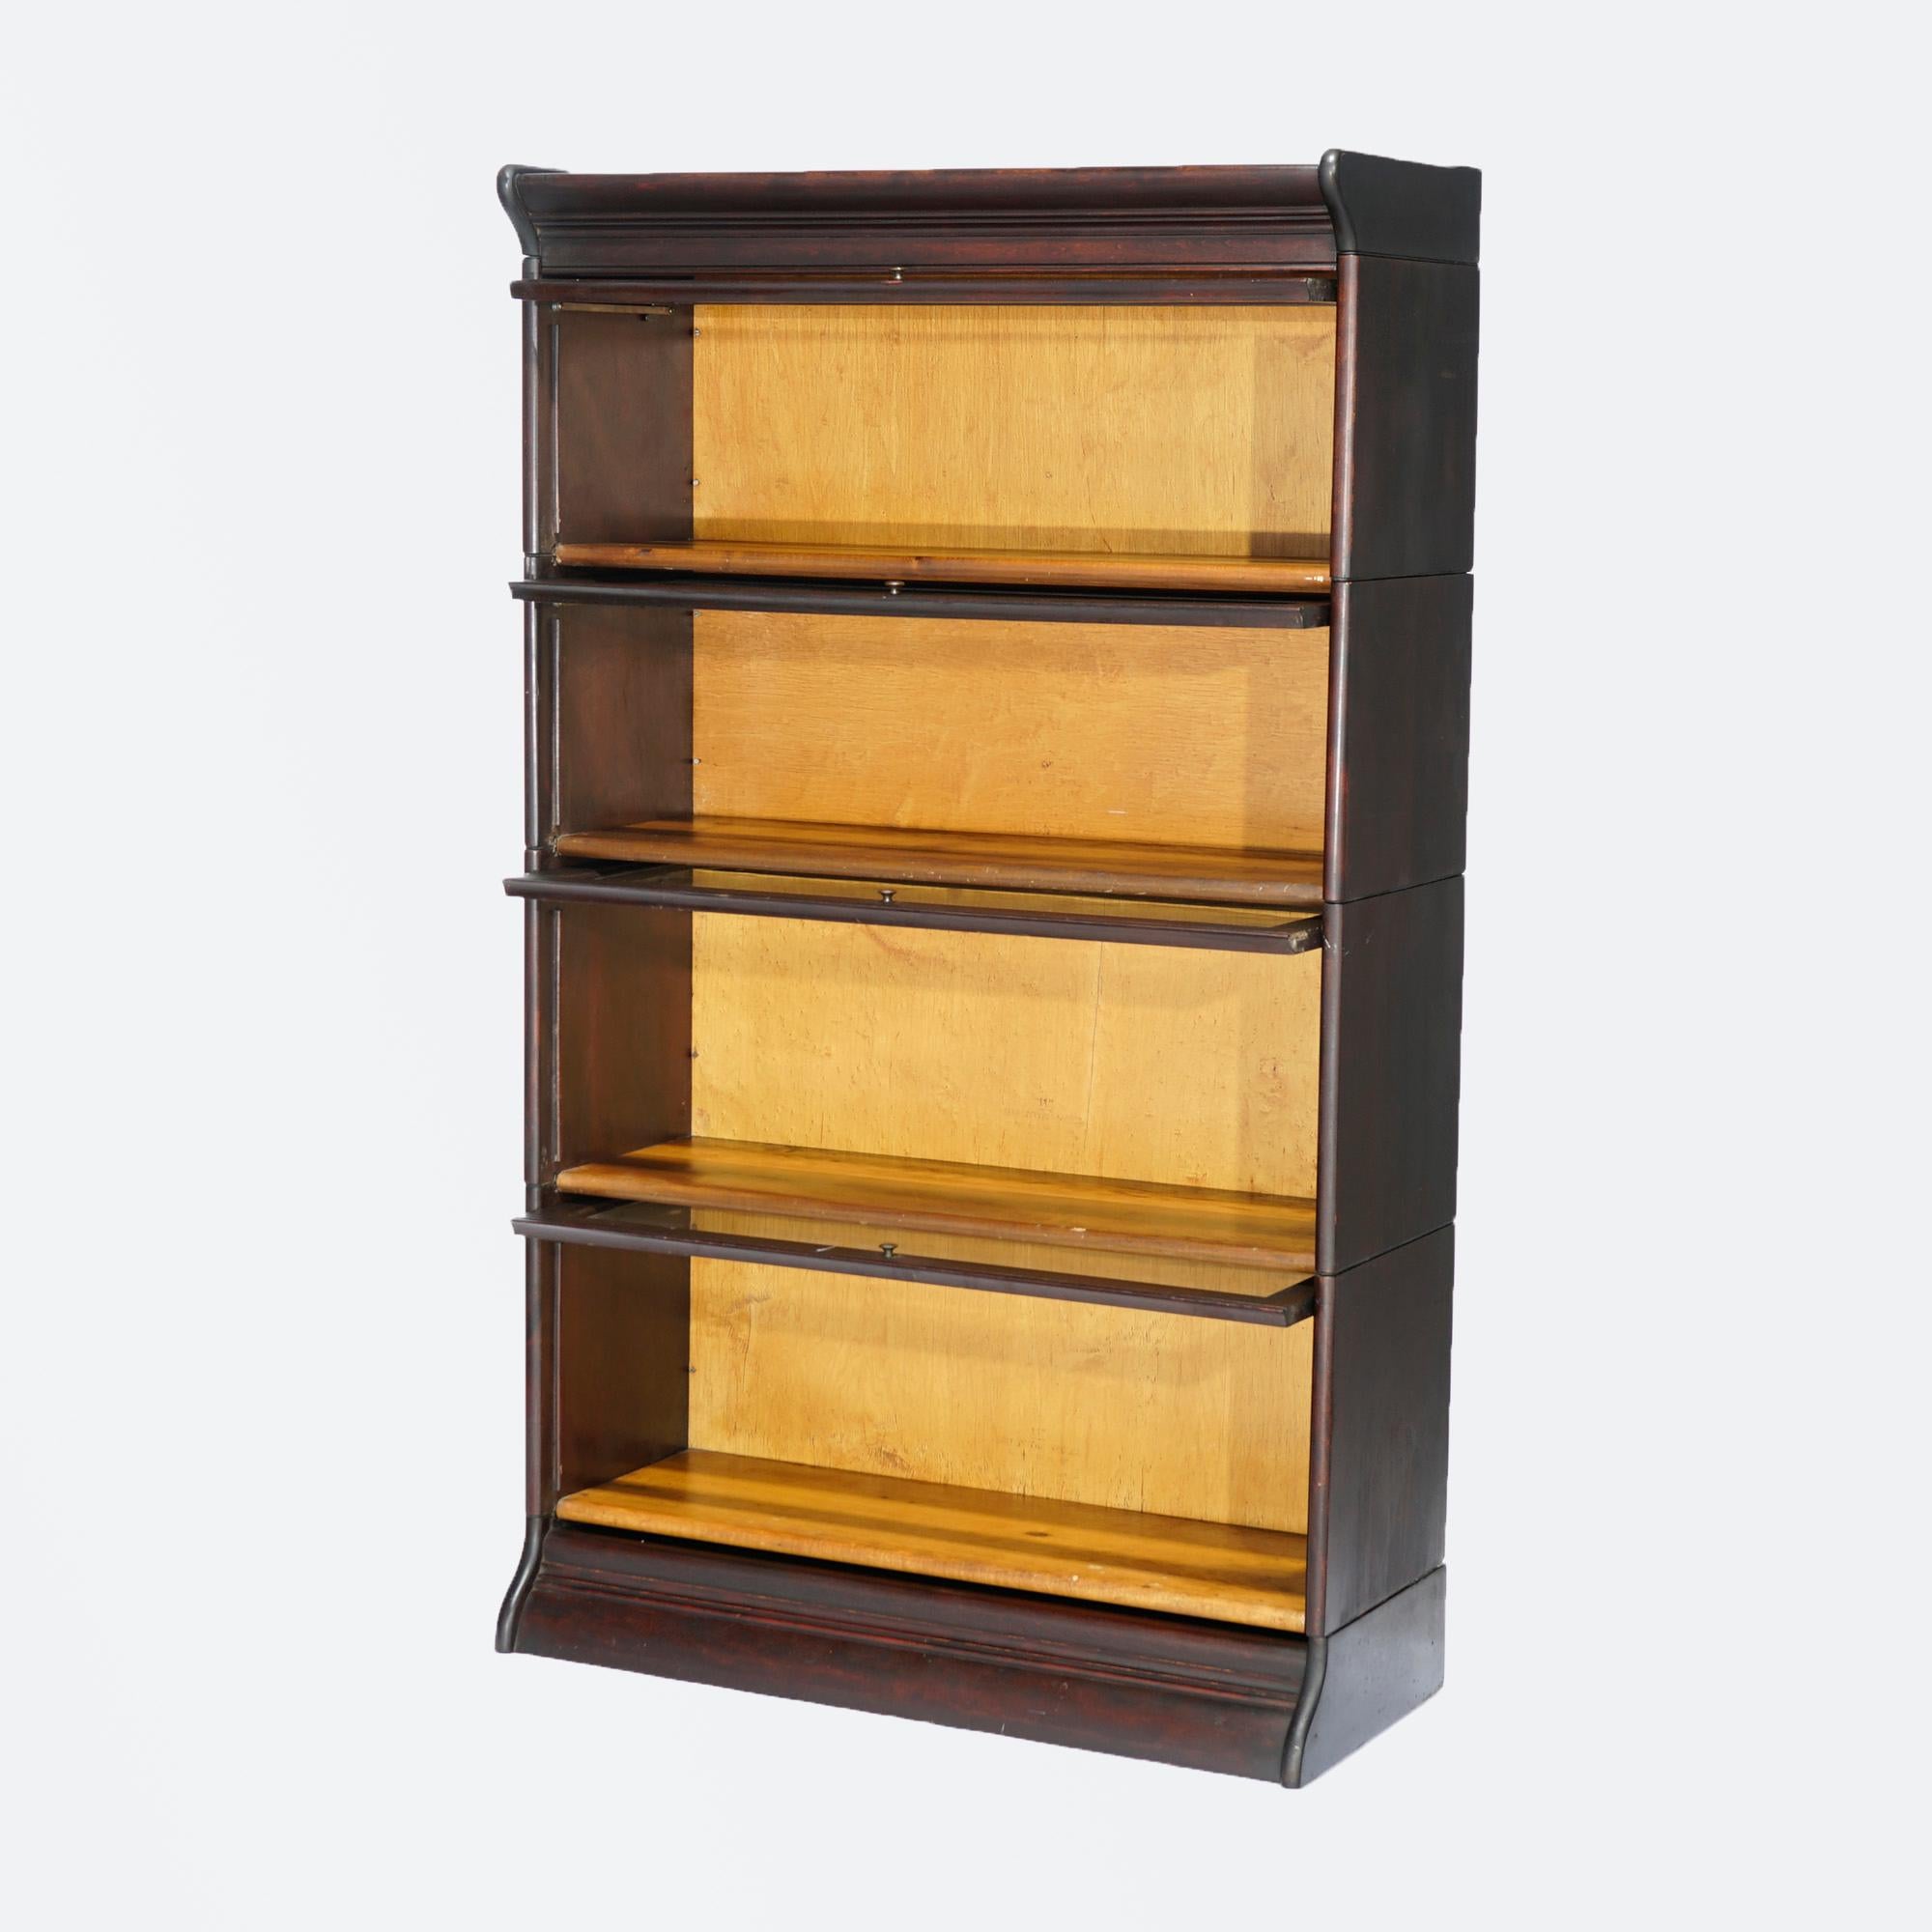 An antique Arts & Crafts barrister bookcase by Gunn offers mahogany construction with four stacks, each having pull out glass doors and seated on ogee base as photographed, c1890

Measures- 58''H x 34.25''W x 14.25''D.

Catalogue Note: Ask about